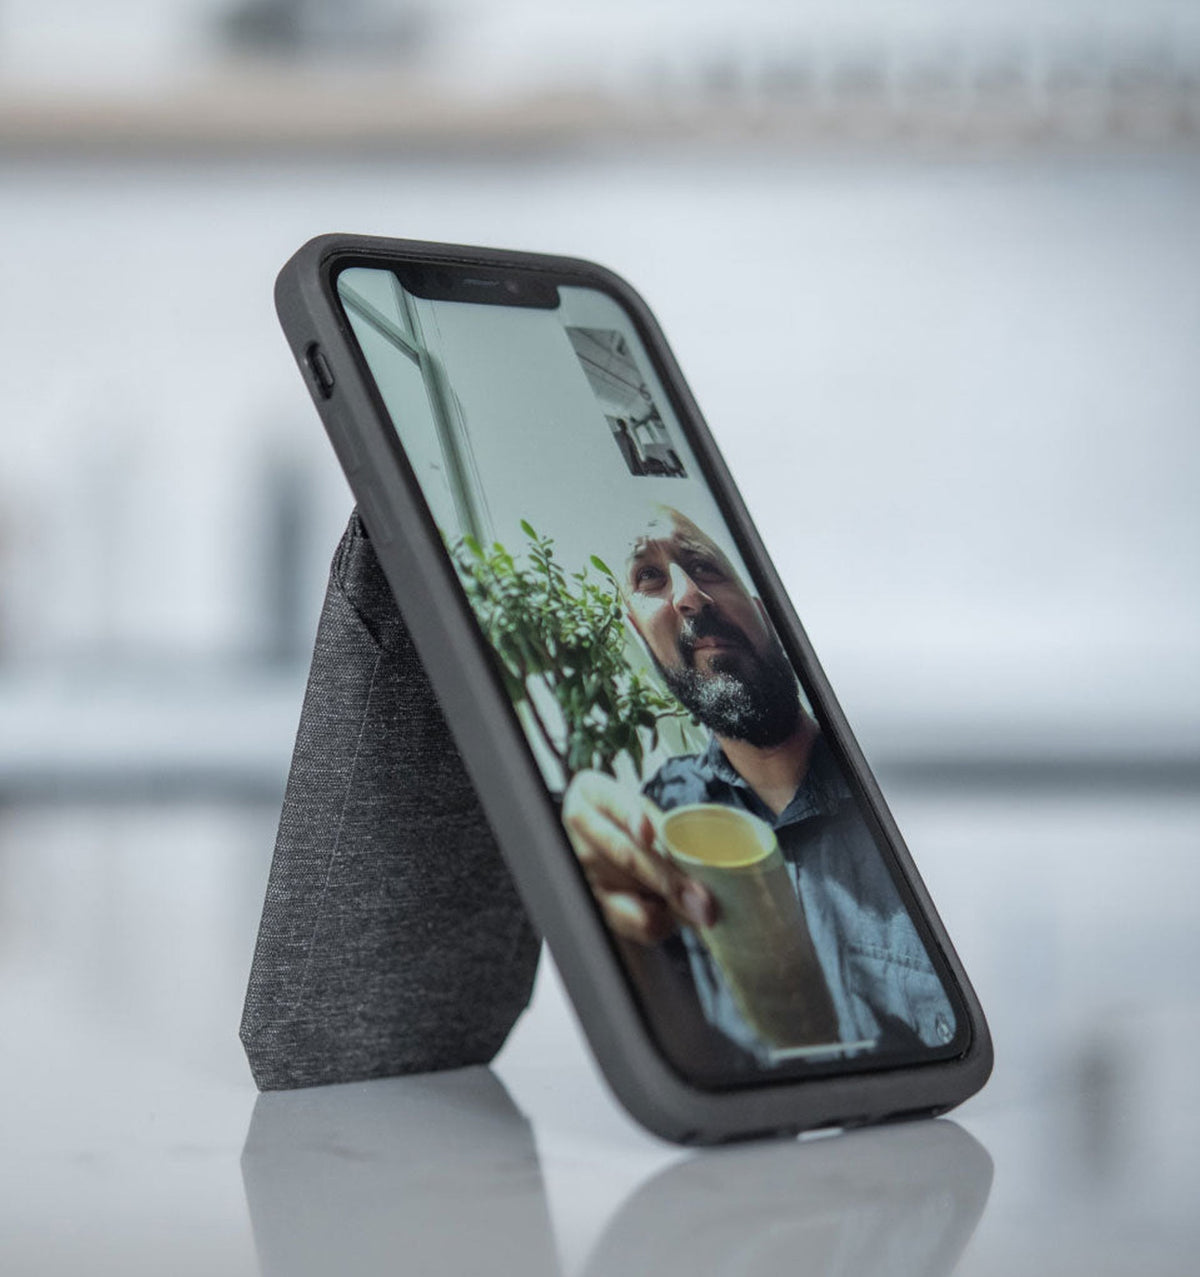 Peak Design Mobile - Stand Wallet - Charcoal